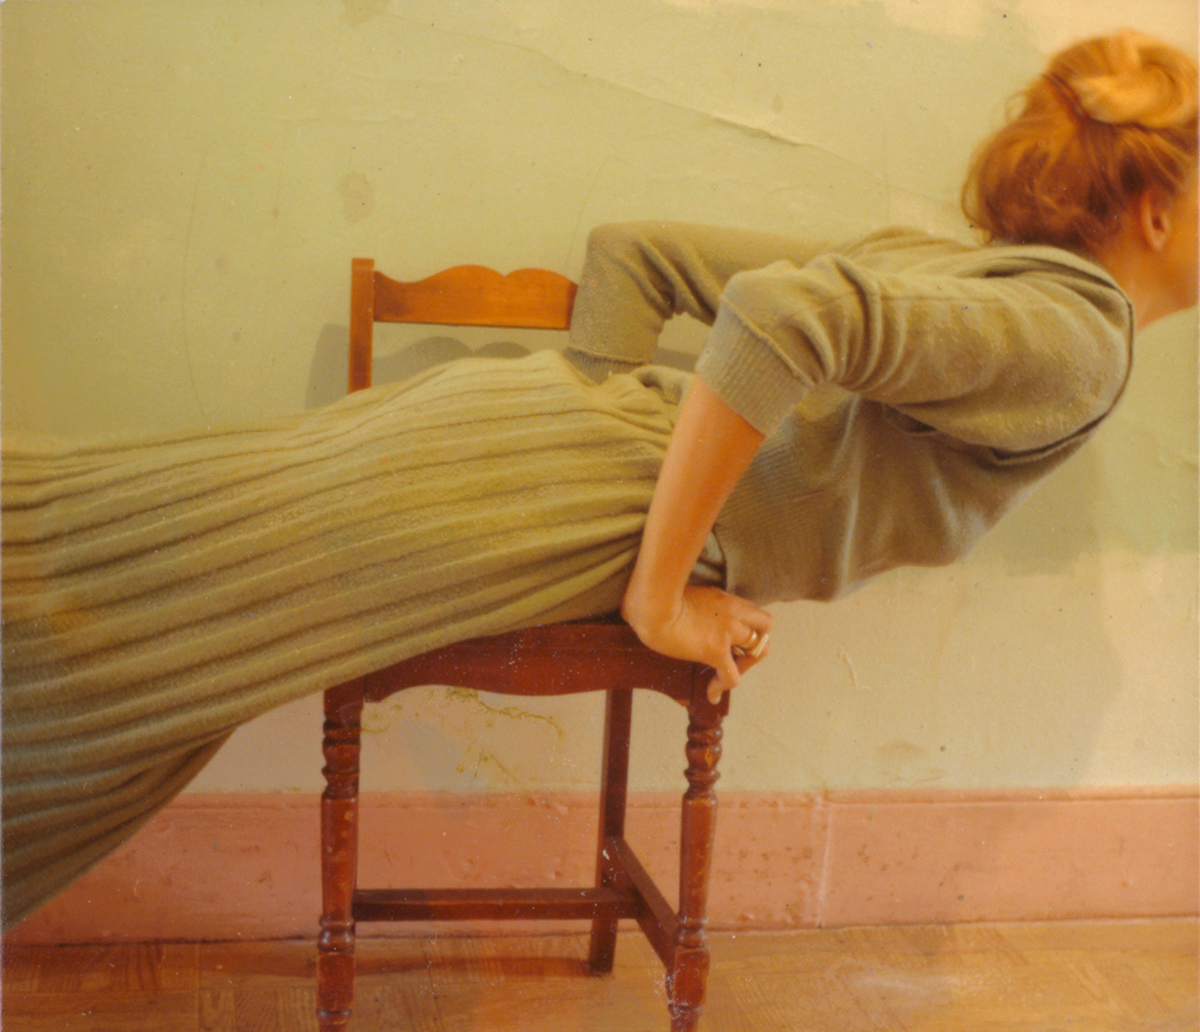 Rare colour works by Francesca Woodman revealed in new show